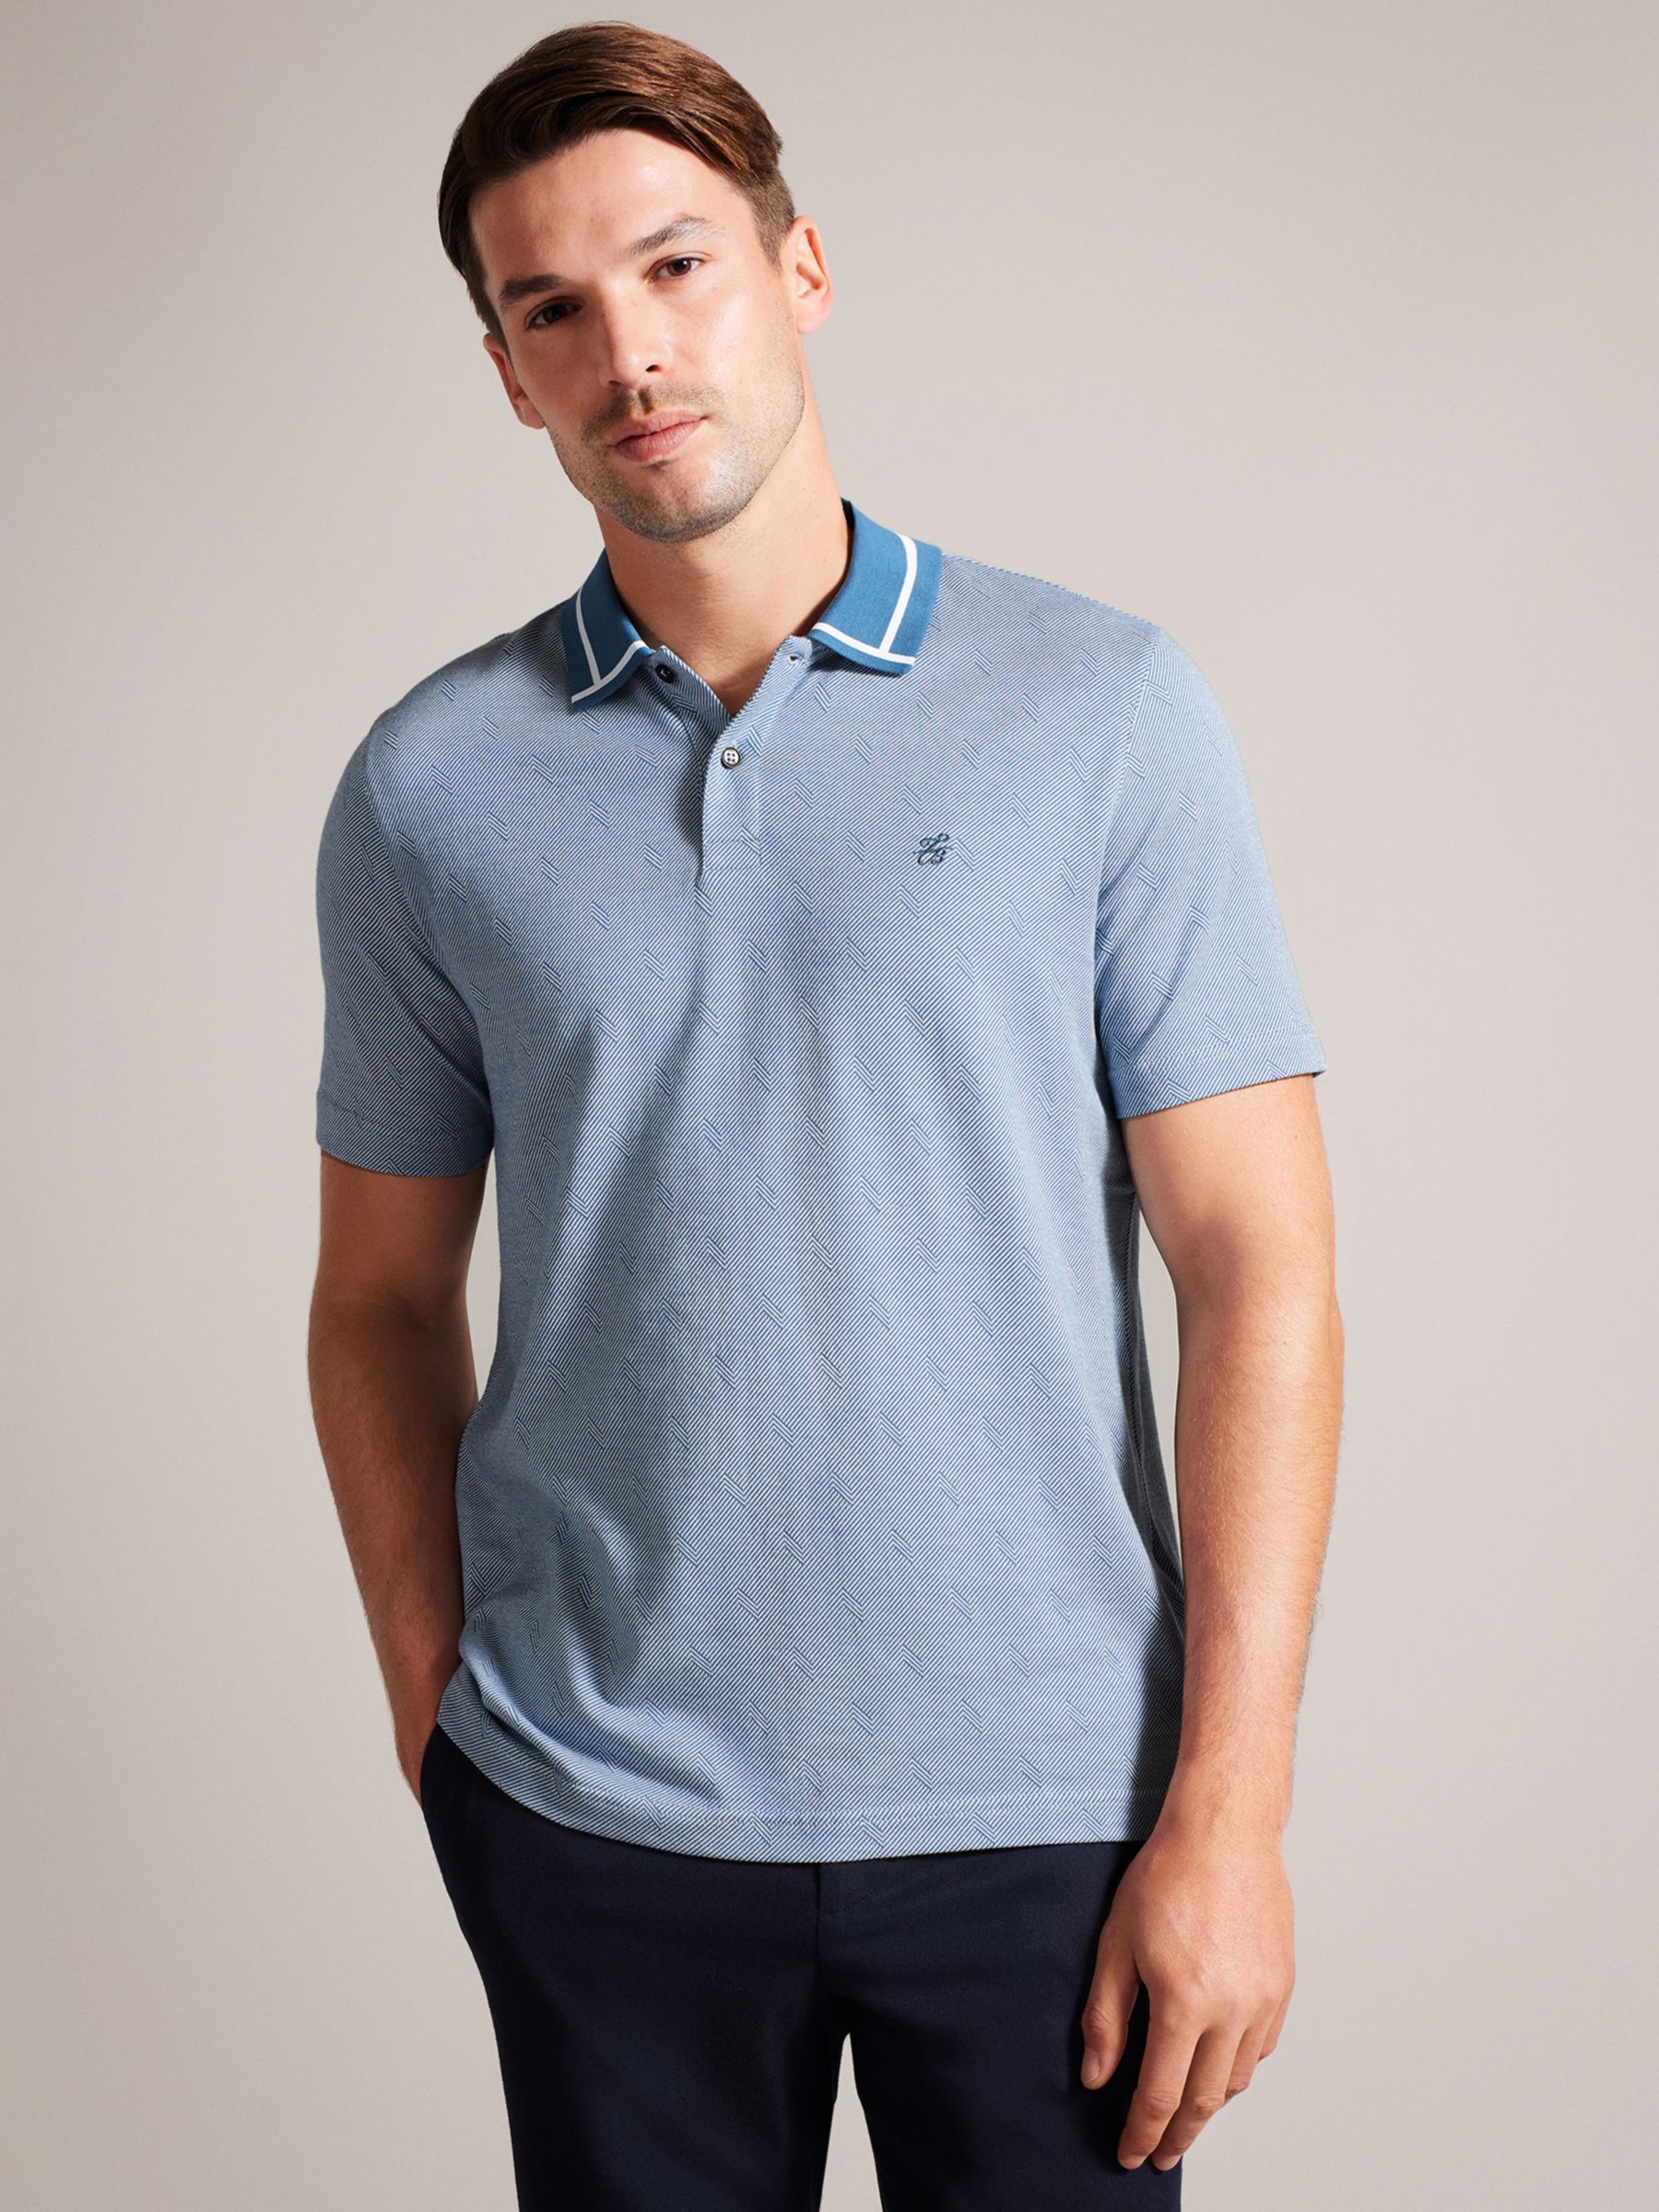 Men's Blue Polo & Rugby Shirts | John Lewis & Partners